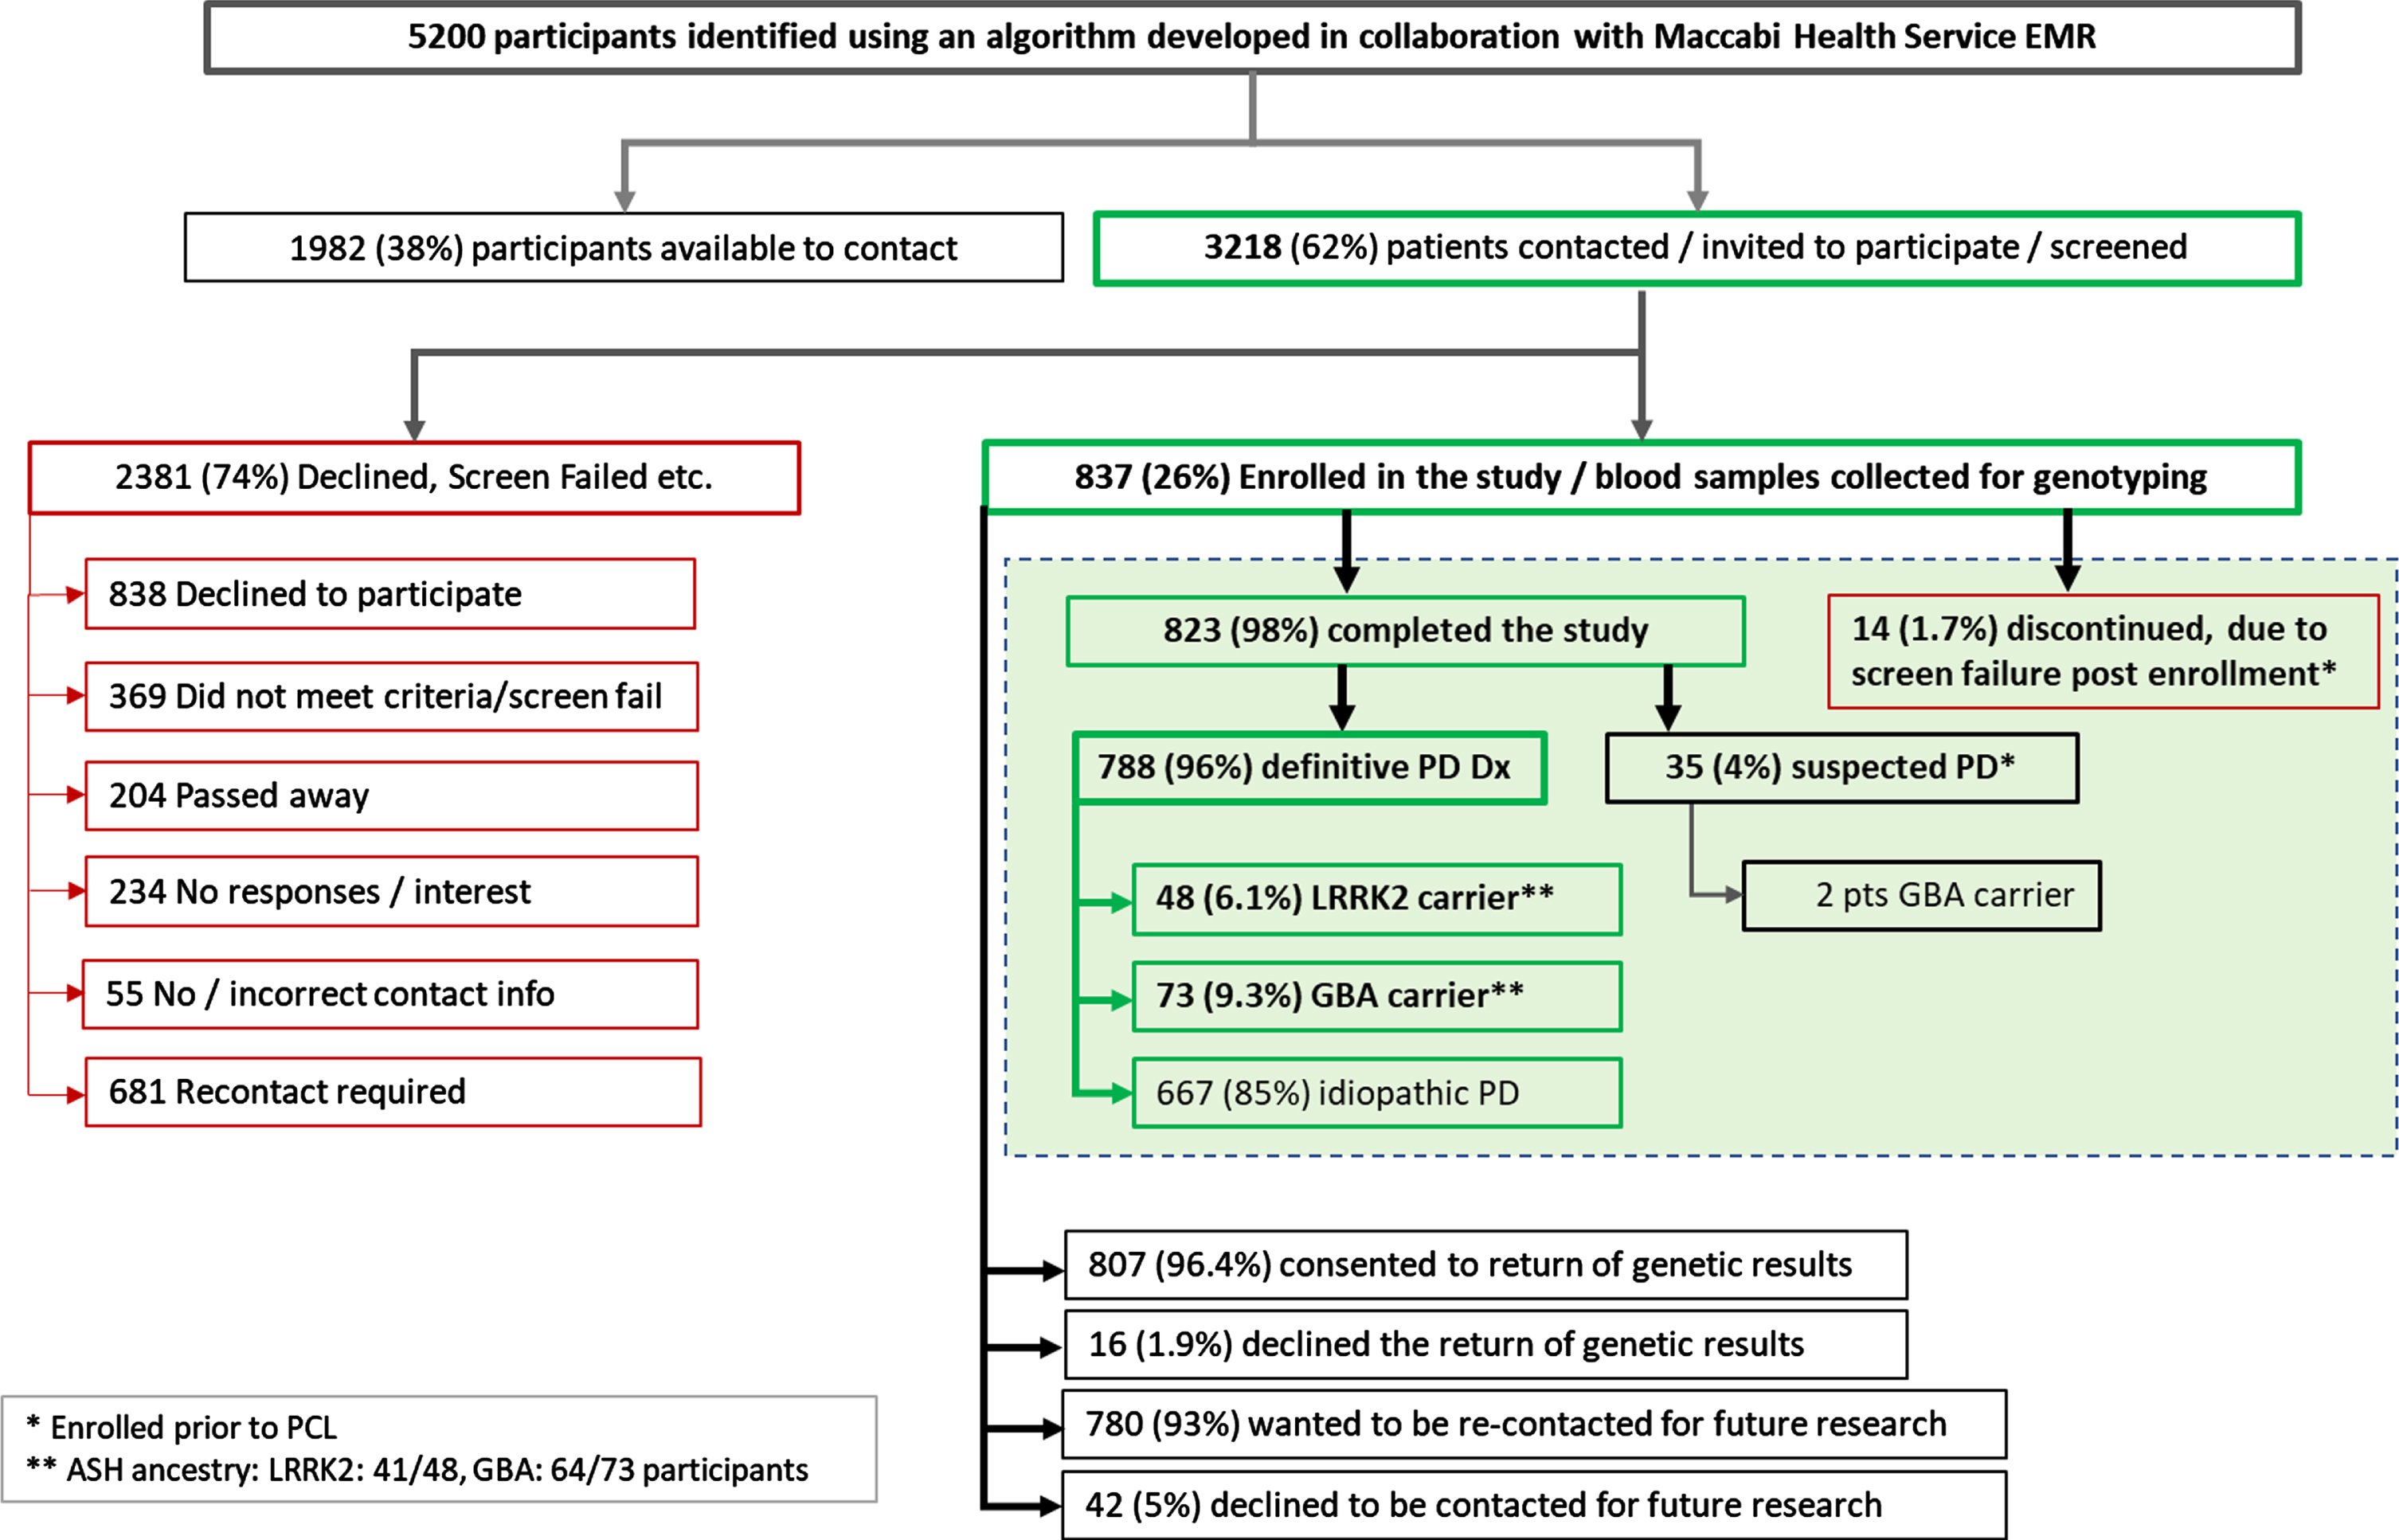 Summary of recruitment to genetic results. Out of 5,200 participants who met the criteria for PD or high probability of PD as identified from the EMR review: 3,218 were contacted and 1,982 were not contacted due to early study completion. More than 2,380 participants out of 3,218 participants contacted either declined, did not meet the study criteria, or failed to meet screening criteria resulting in enrollment of 837 participants. The genetic dataset is shown within the dashed shaded box. Of the 837 participants, a total of 823 participants completed the study, and 14 participants discontinued primarily for not meeting study inclusion eligibility post enrollment (following the issuance of the protocol clarification letter). 788 participants had a definitive or clinically established PD diagnosis as per MDS criteria, and 35 participants whose EMR did not include a clinically established diagnosis of PD, but included high probability or suspected of PD. Among those 788 participants with the clinically established or definitive PD diagnoses, those identified as mutation carriers for LRRK2 and GBA were 48 and 73, respectively. 667 participants were identified as idiopathic PD. At the end of trial more than 96% of the participants (807) consented to receive the genetic results, and 93% (780) of the participants wanted to be re-contacted for future research. Dx, diagnosis; PD, Parkinson’s disease.